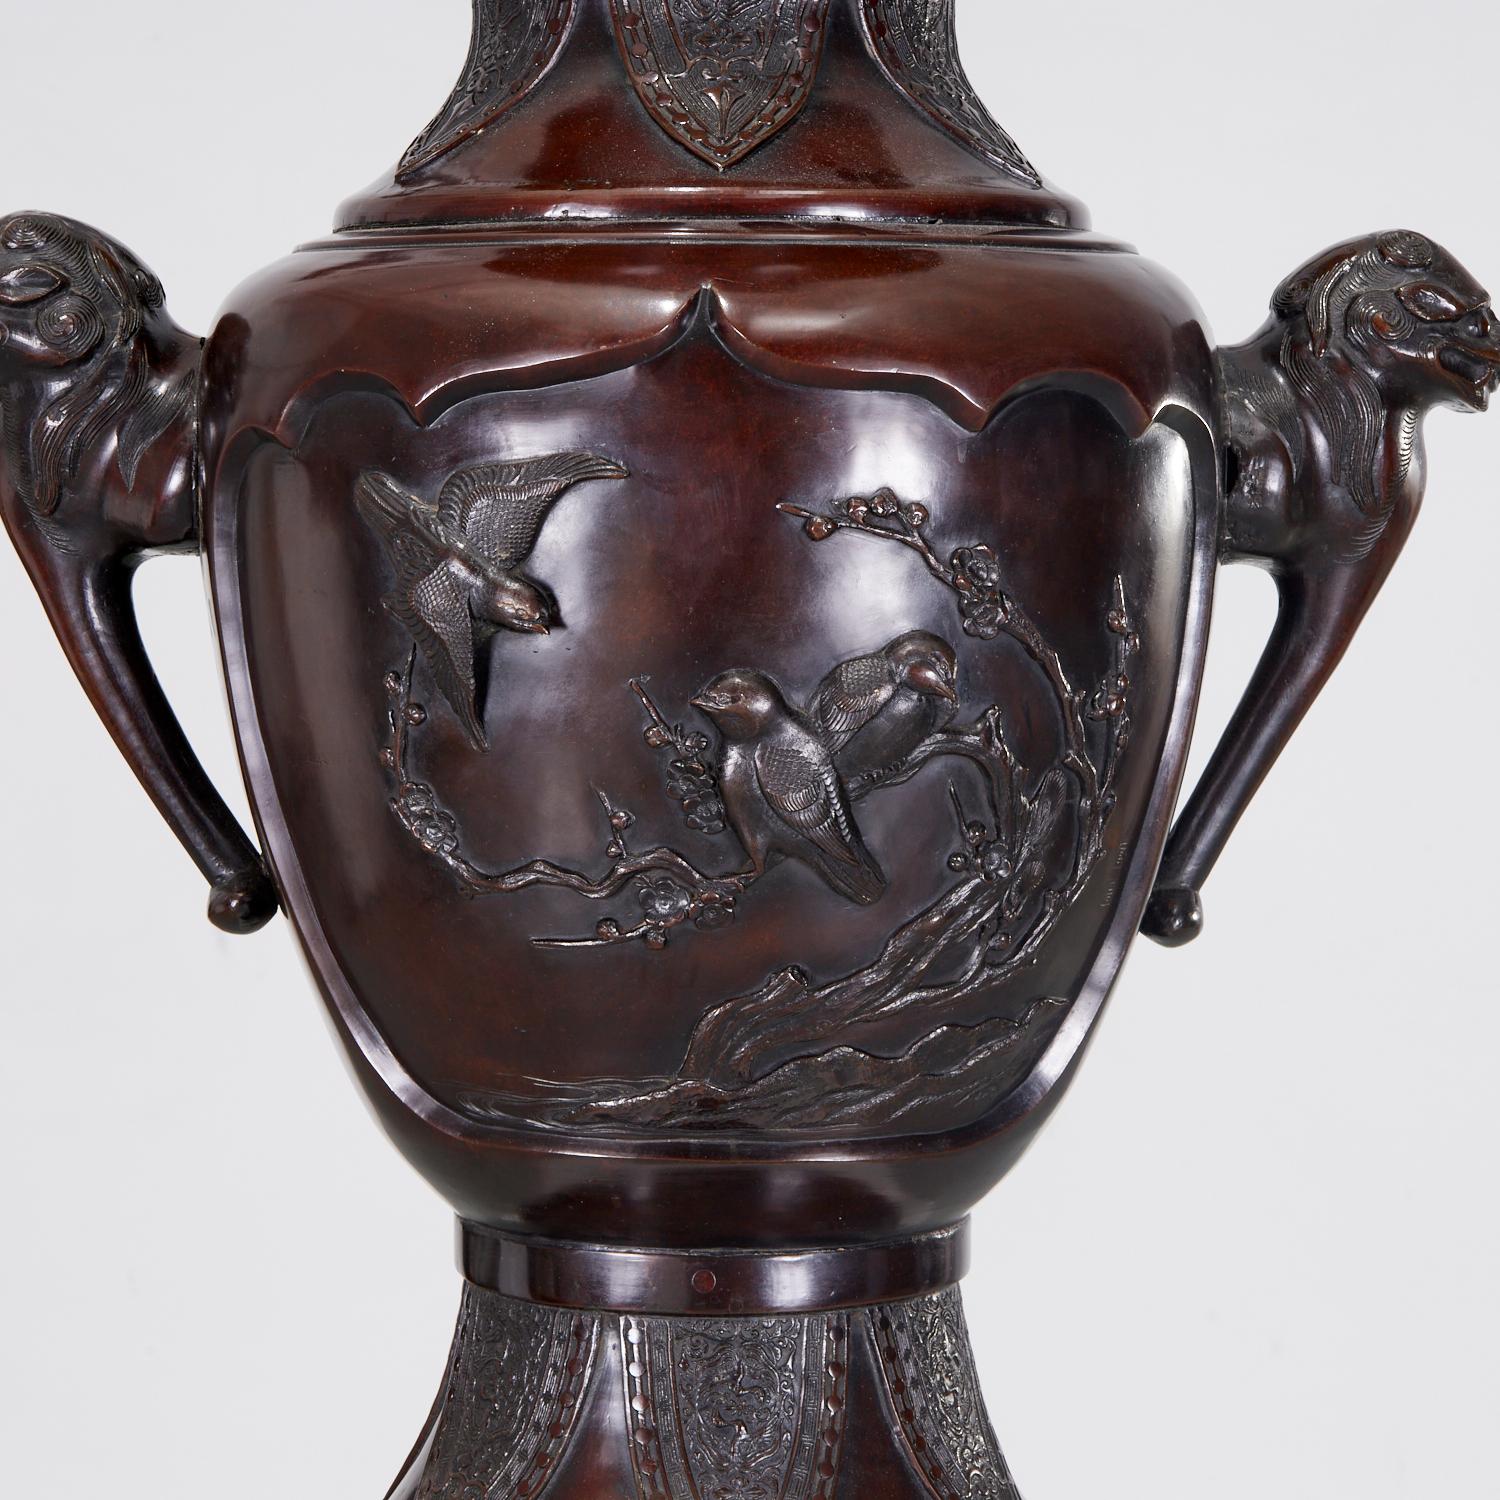 Large Antique Japanese Meiji Period Bronze Floor Vase with Foo Dog Handles In Good Condition For Sale In Morristown, NJ